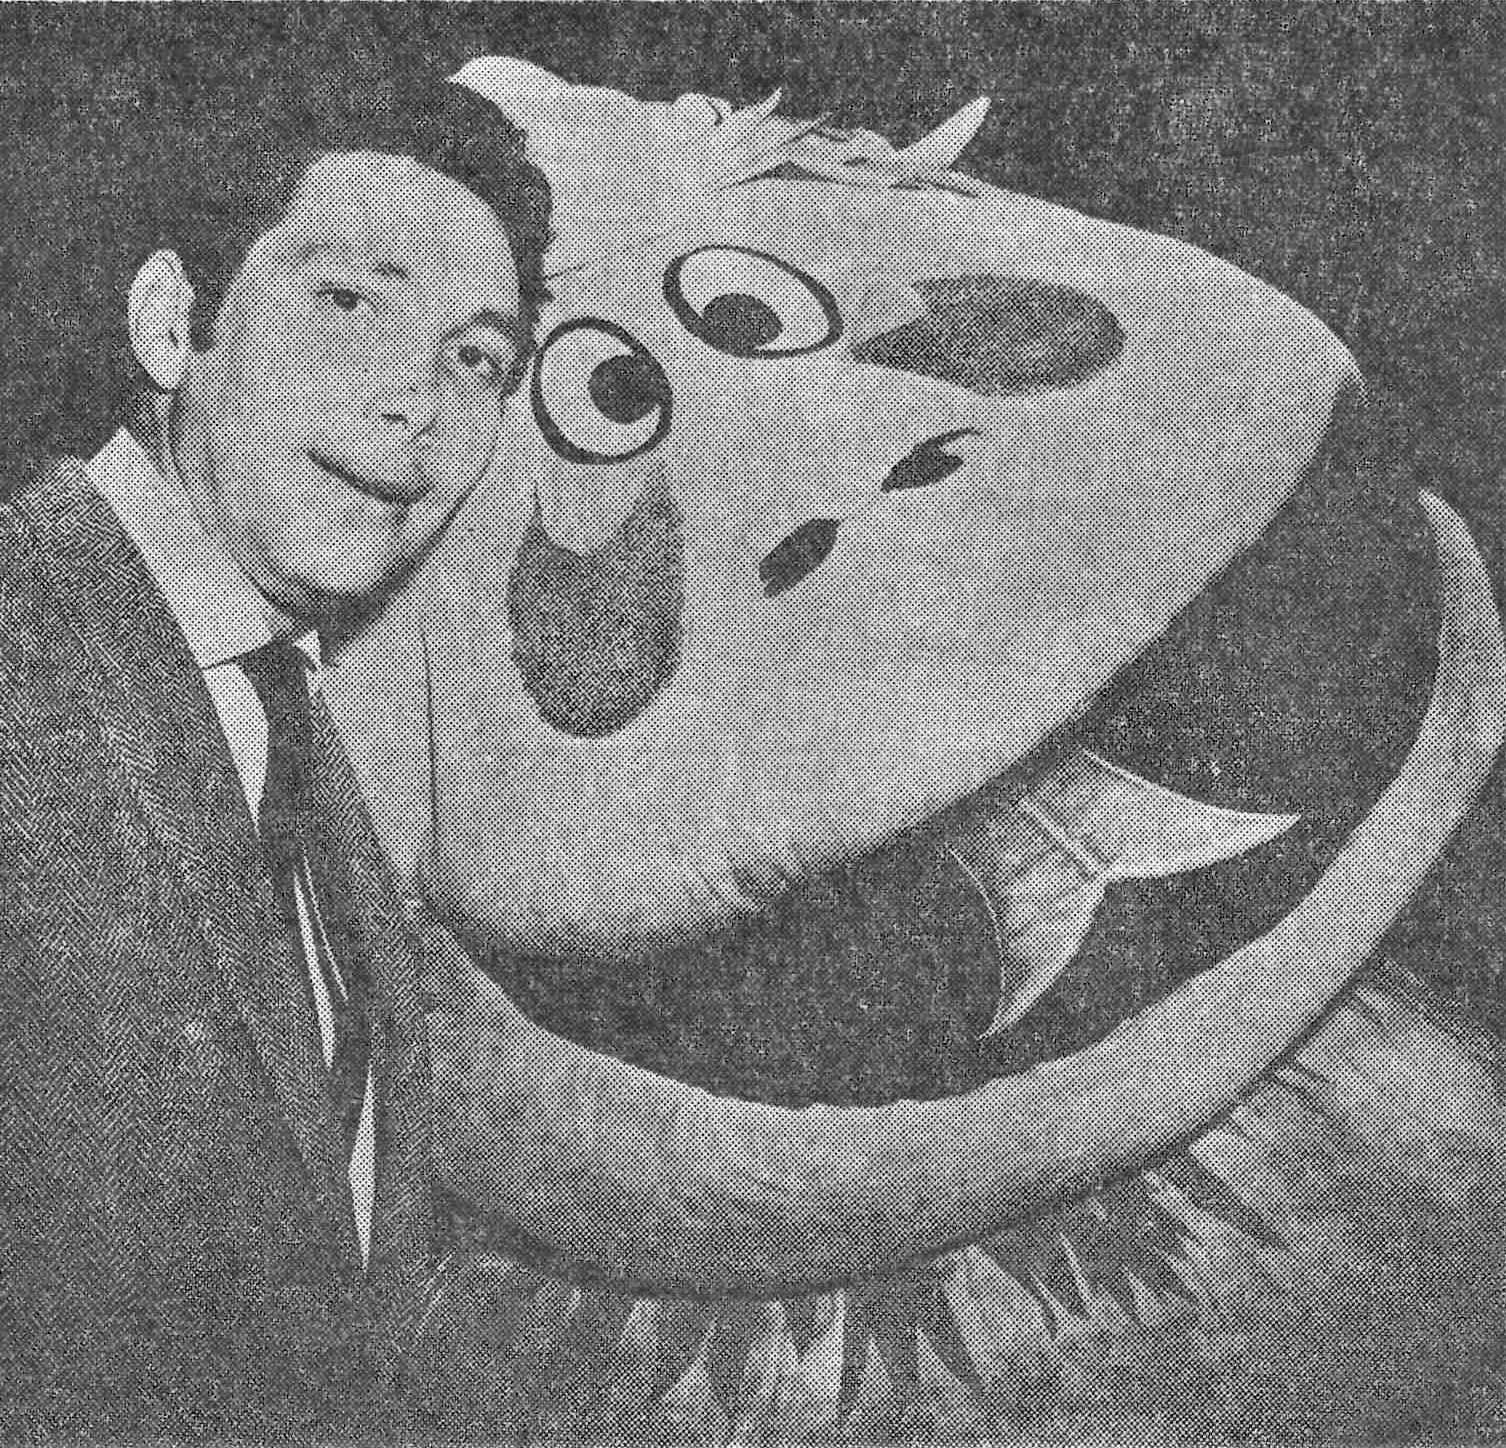 Black and white photograph of puppeteer Mart Krofft with the "beast" mascot puppet from the Krofft brothers' "Kaleidoscope" show at Hemisfair '68 in San Antonio, Texas.